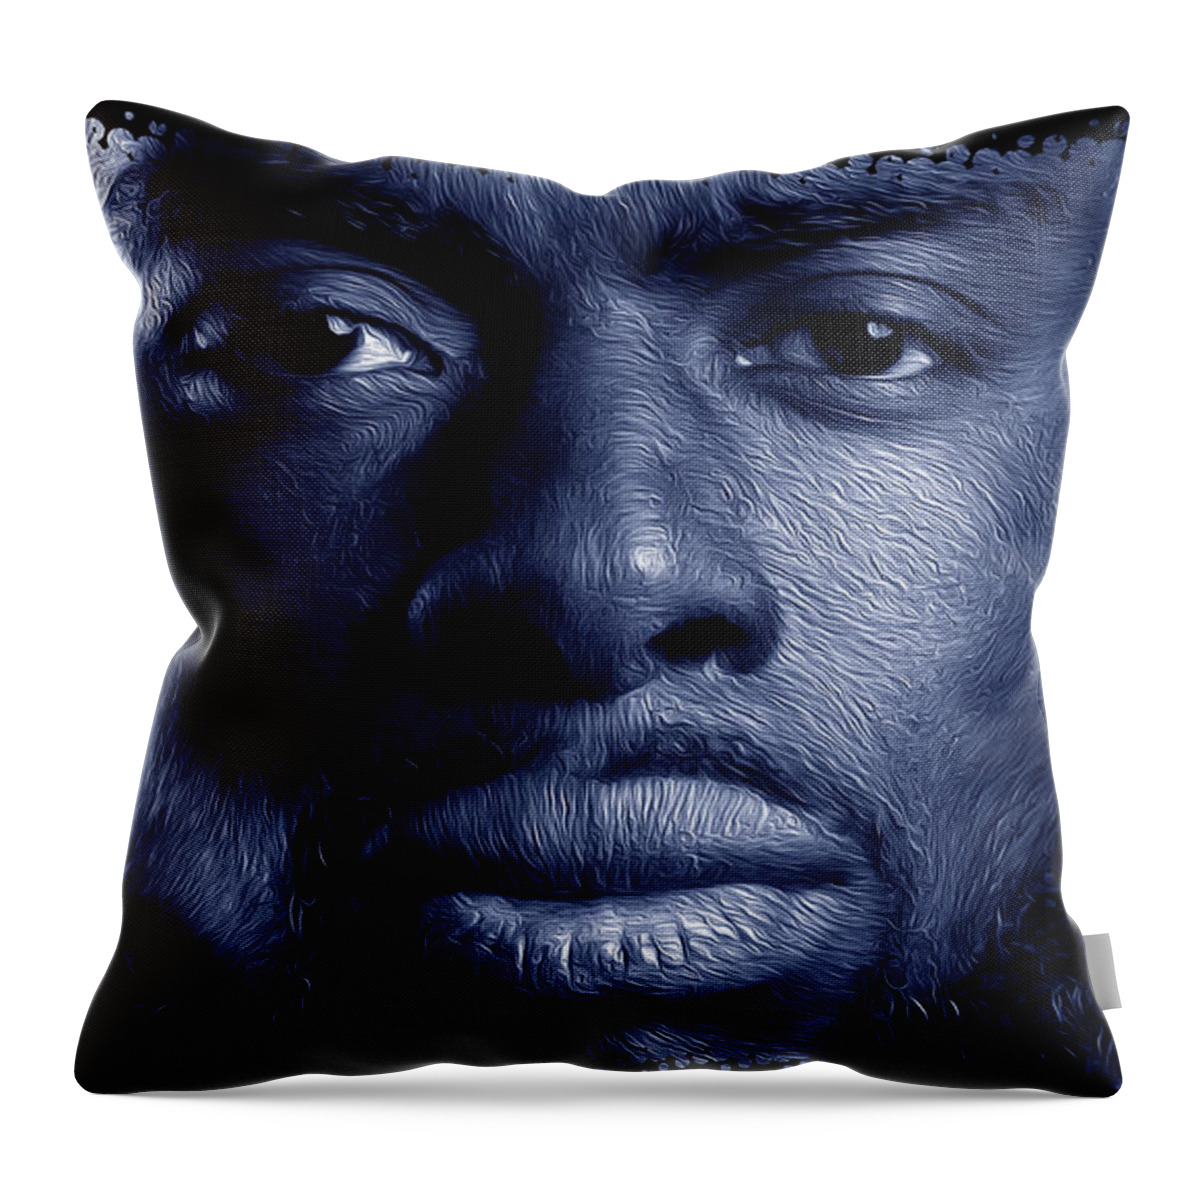 Shades Collection 2 Throw Pillow featuring the digital art Shades of Black 9 by Aldane Wynter